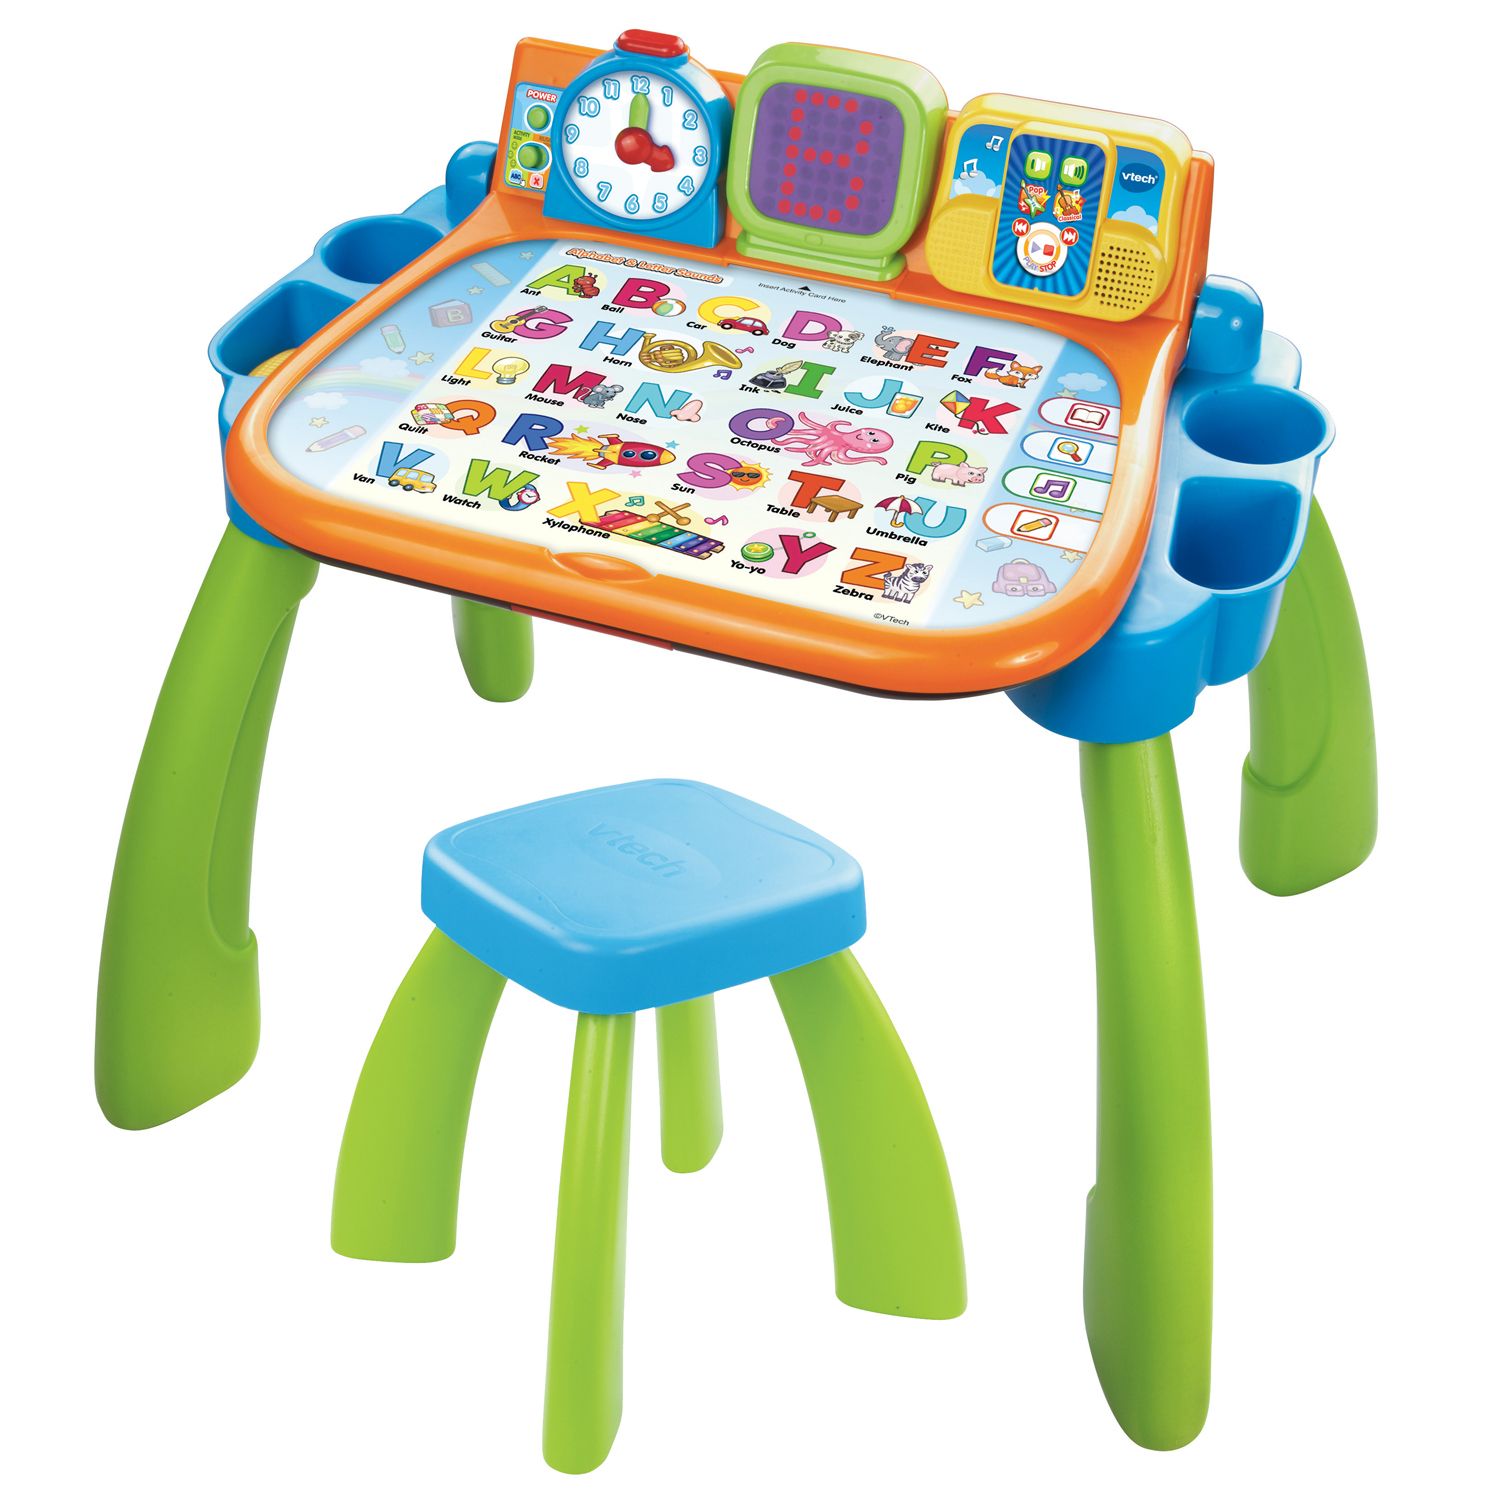 vtech touch & learn activity desk deluxe pink